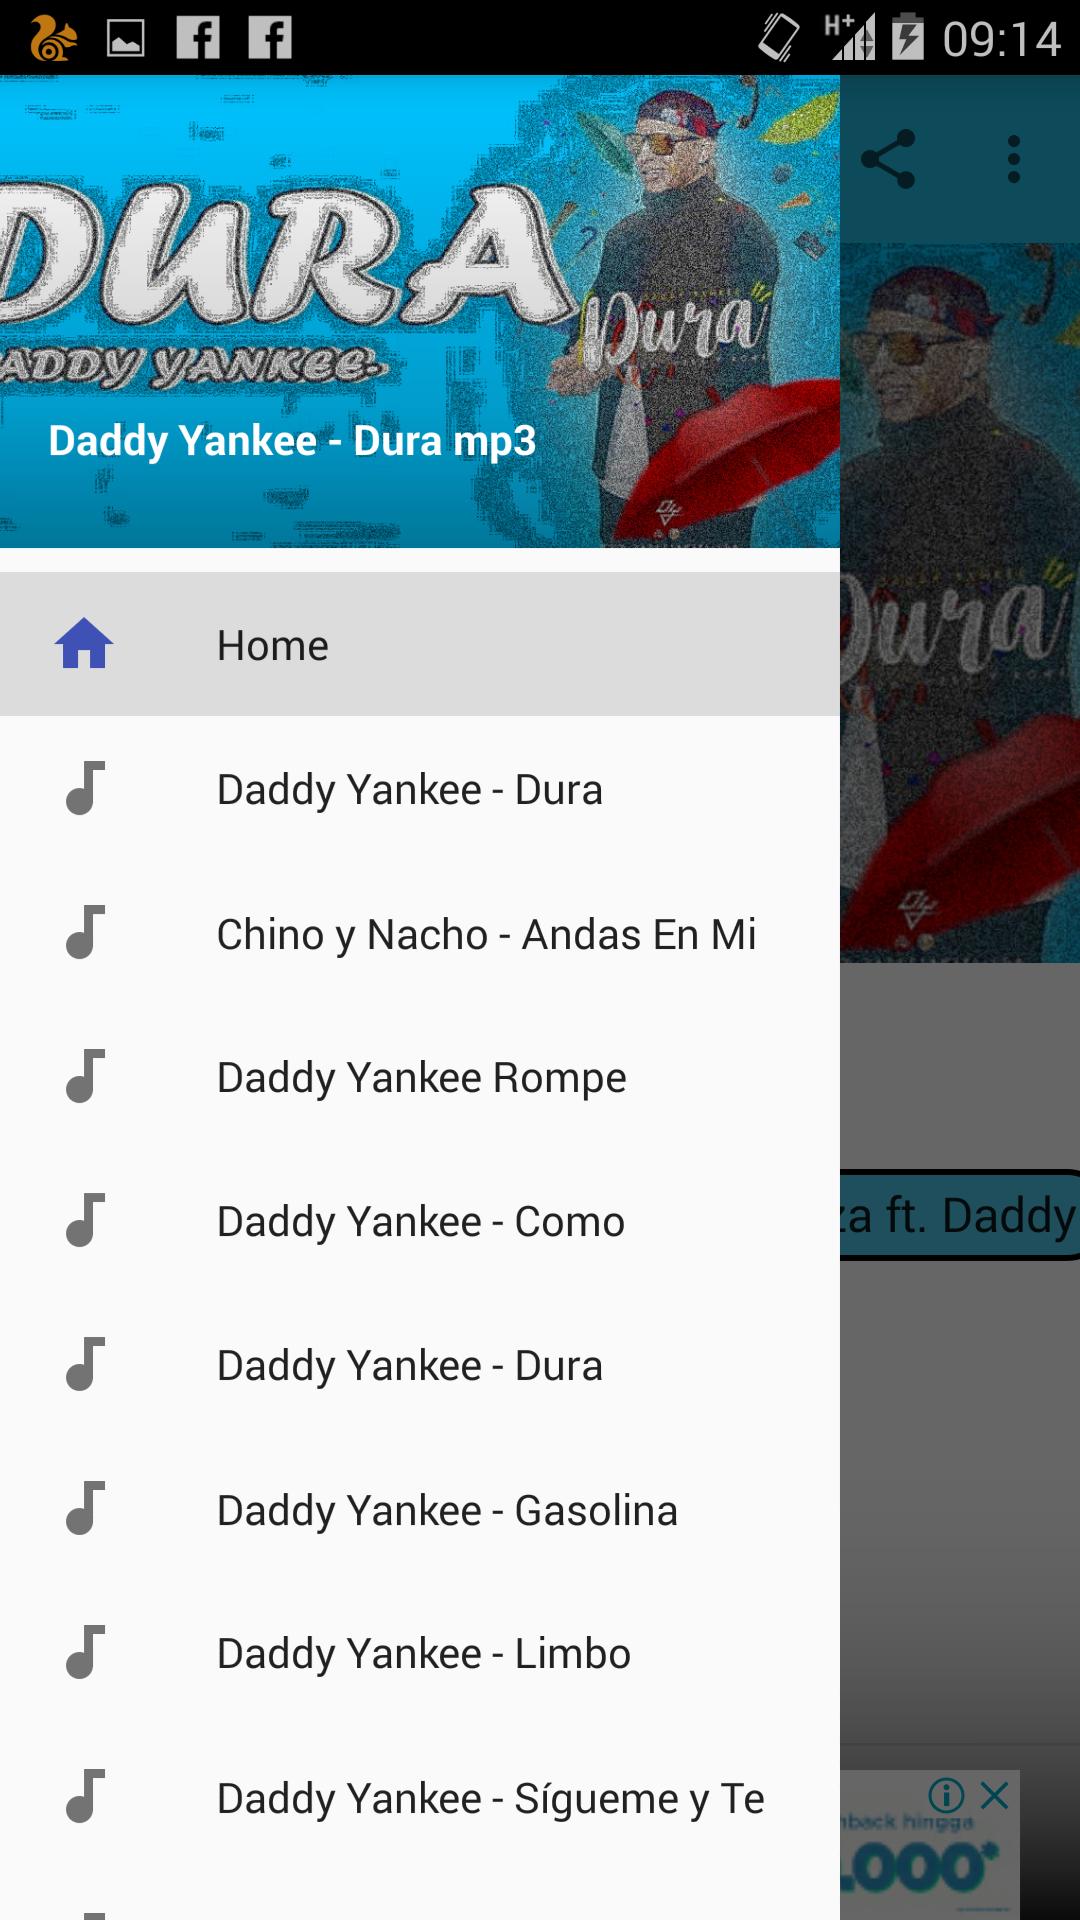 Daddy Yankee - Dura mp3 for Android - APK Download